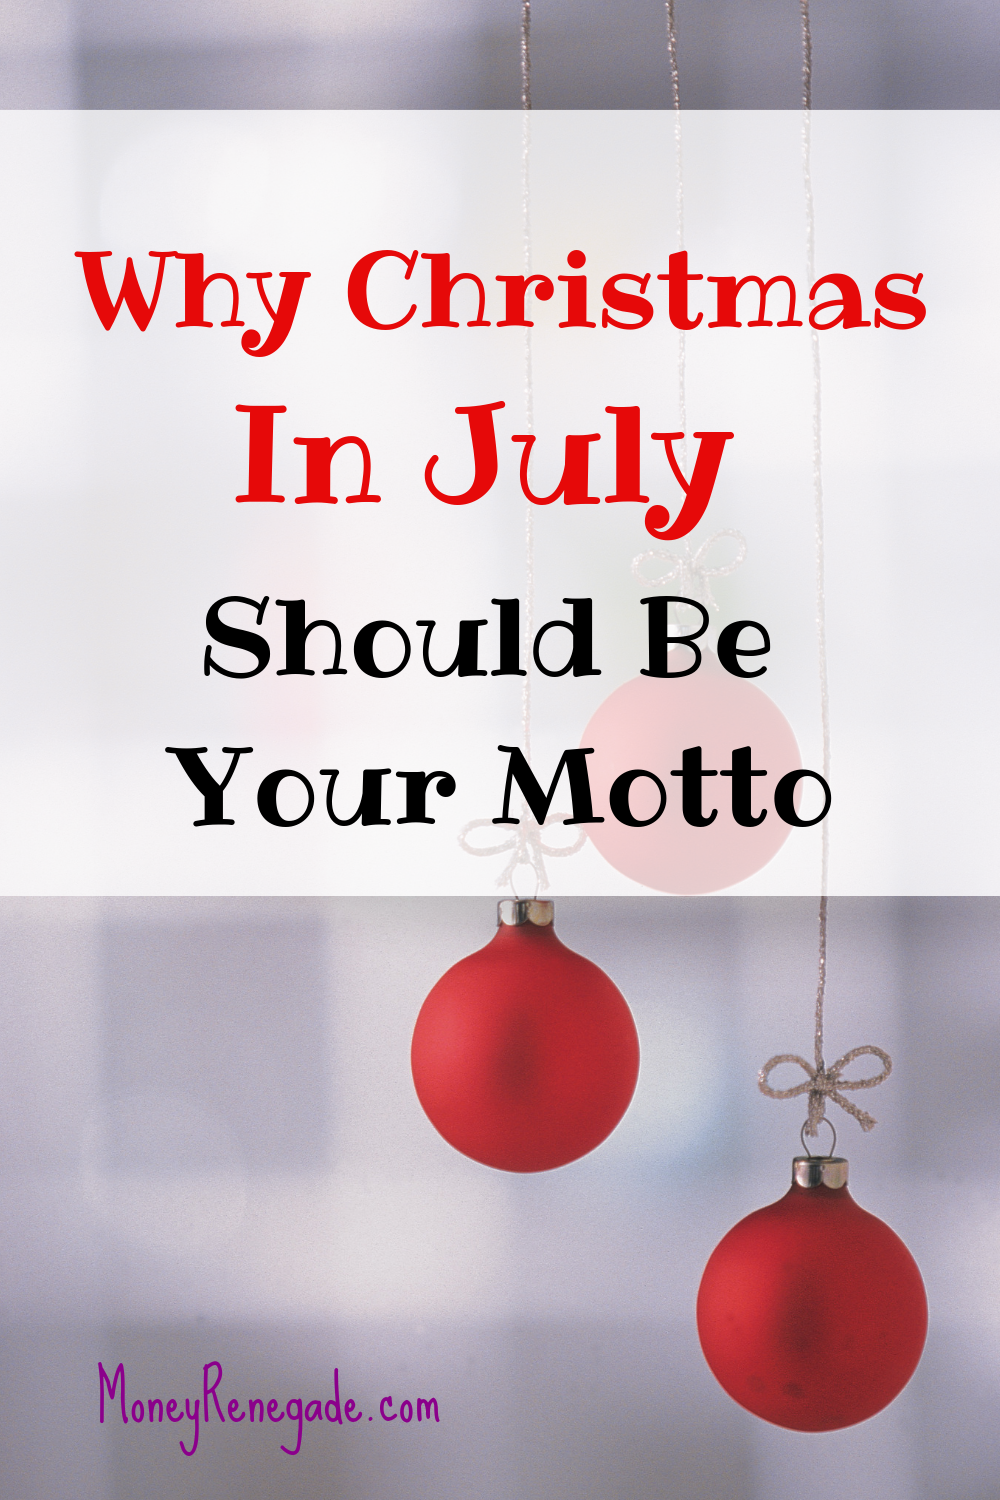 Why Christmas in July Should Be Your Motto